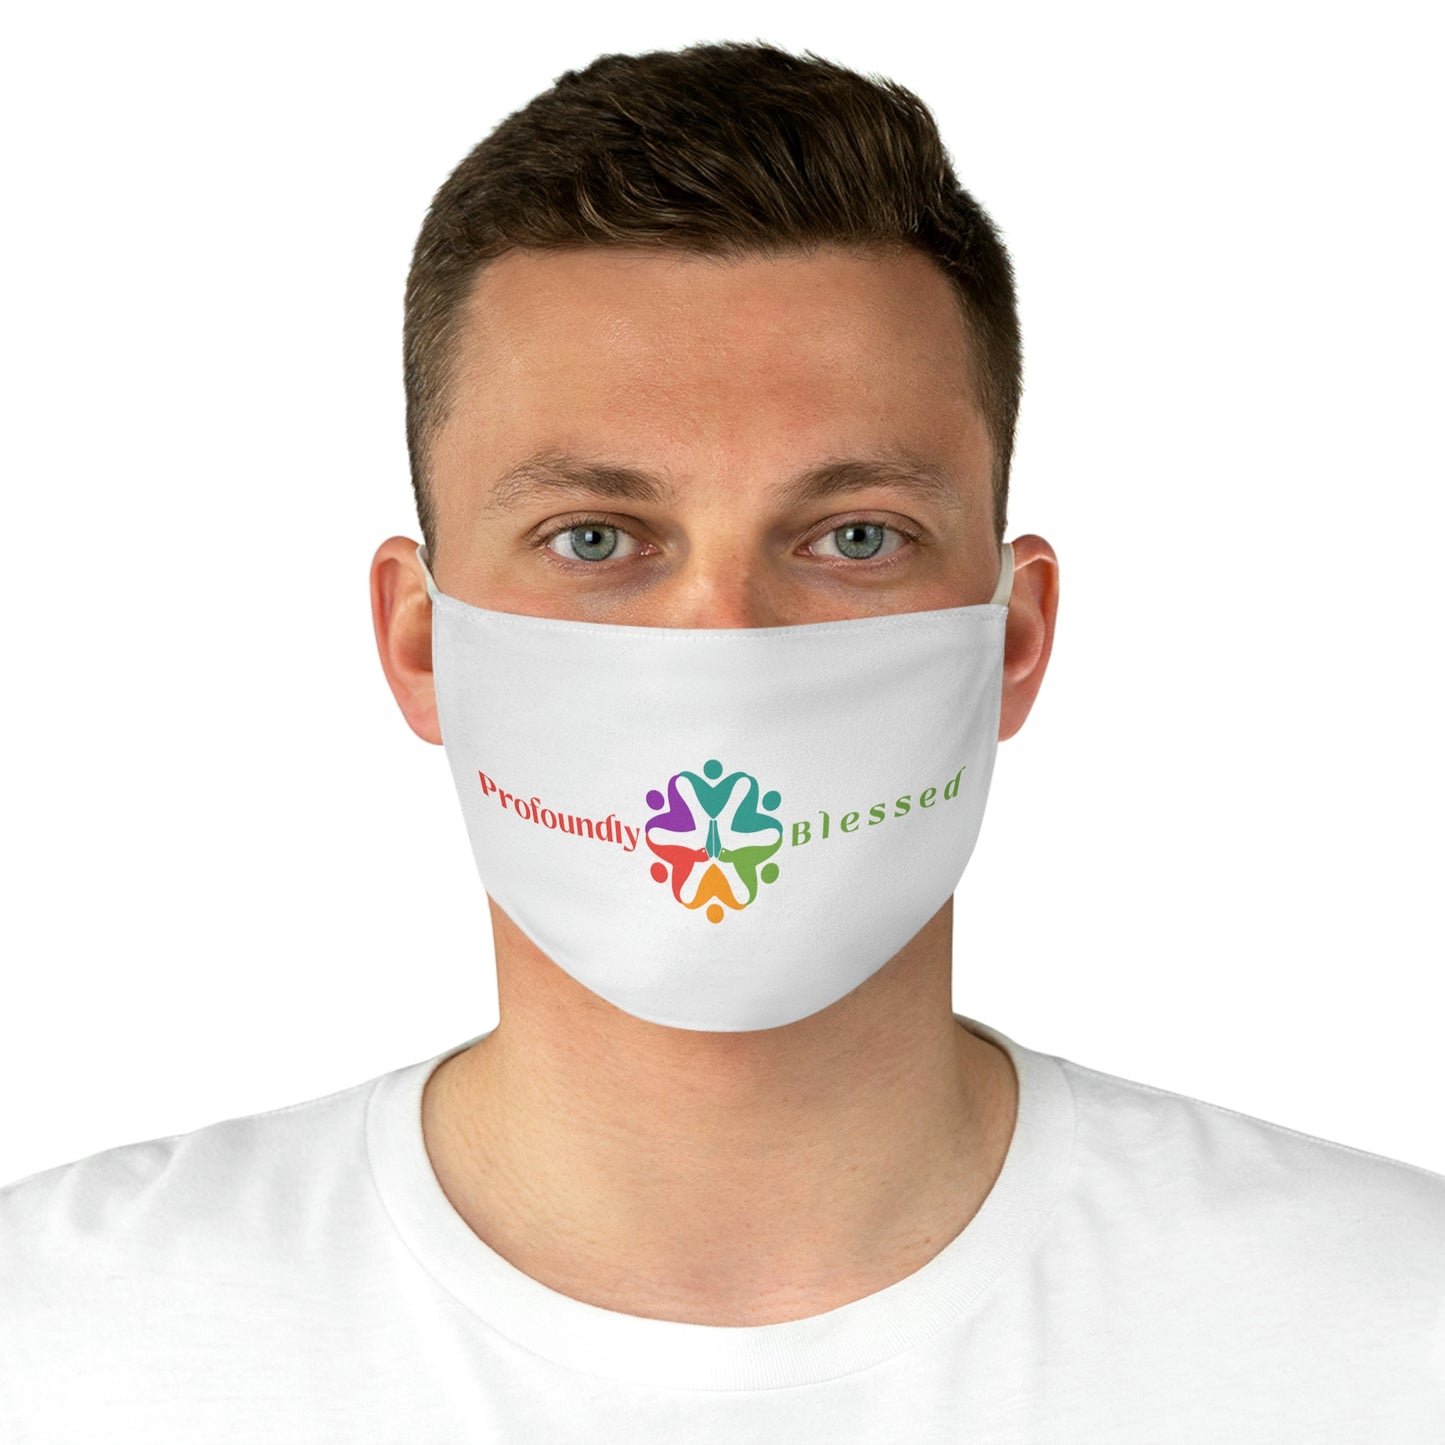 Profoundly Blessed Fabric Face Mask